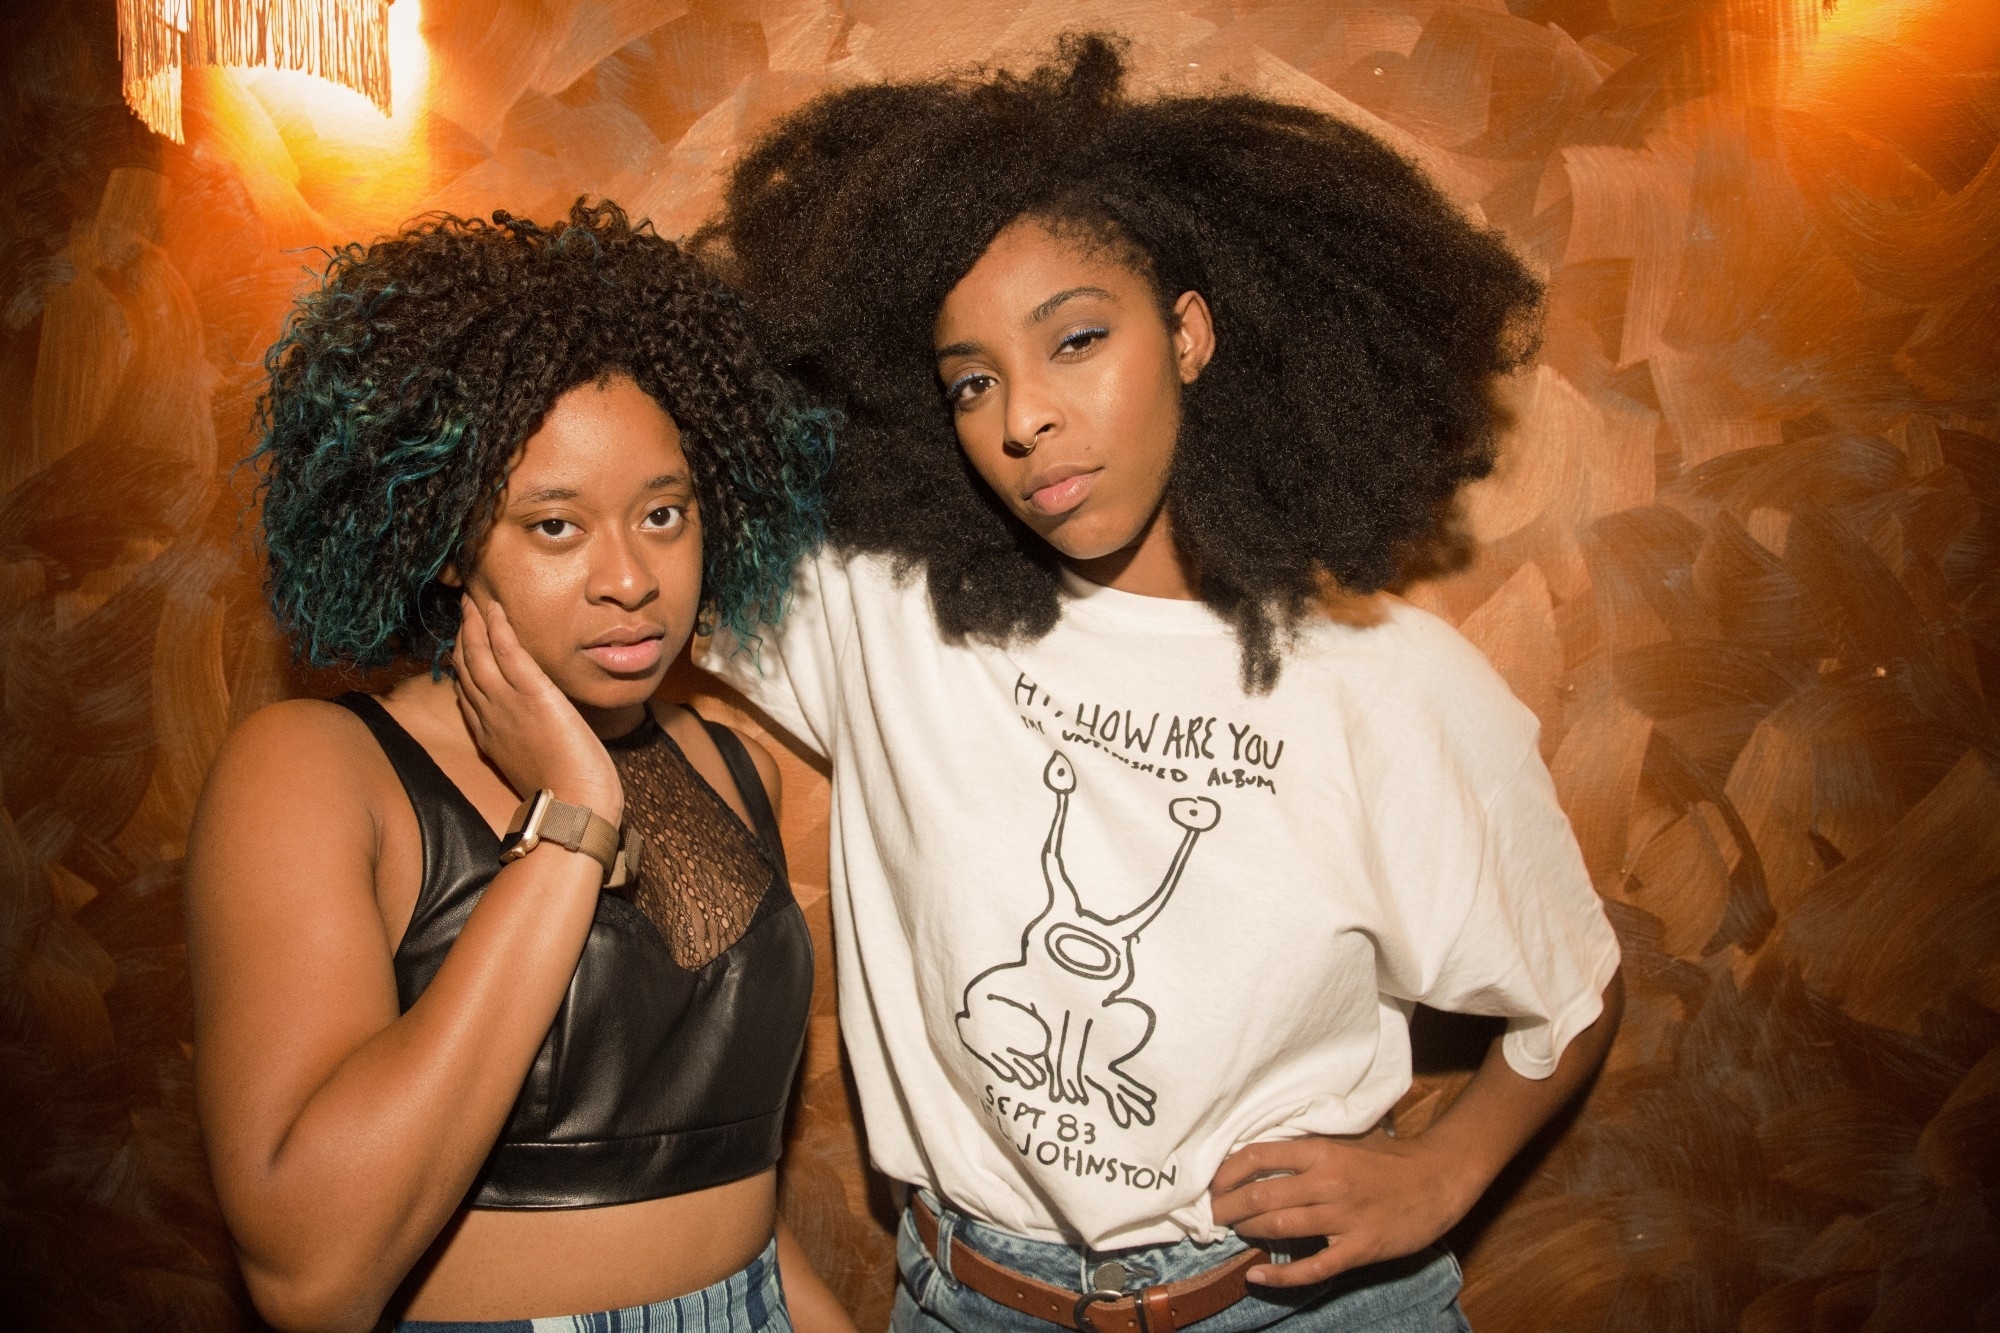 '2 Dope Queens' podcast comes to HBO next year as four hour-long specials | DeviceDaily.com